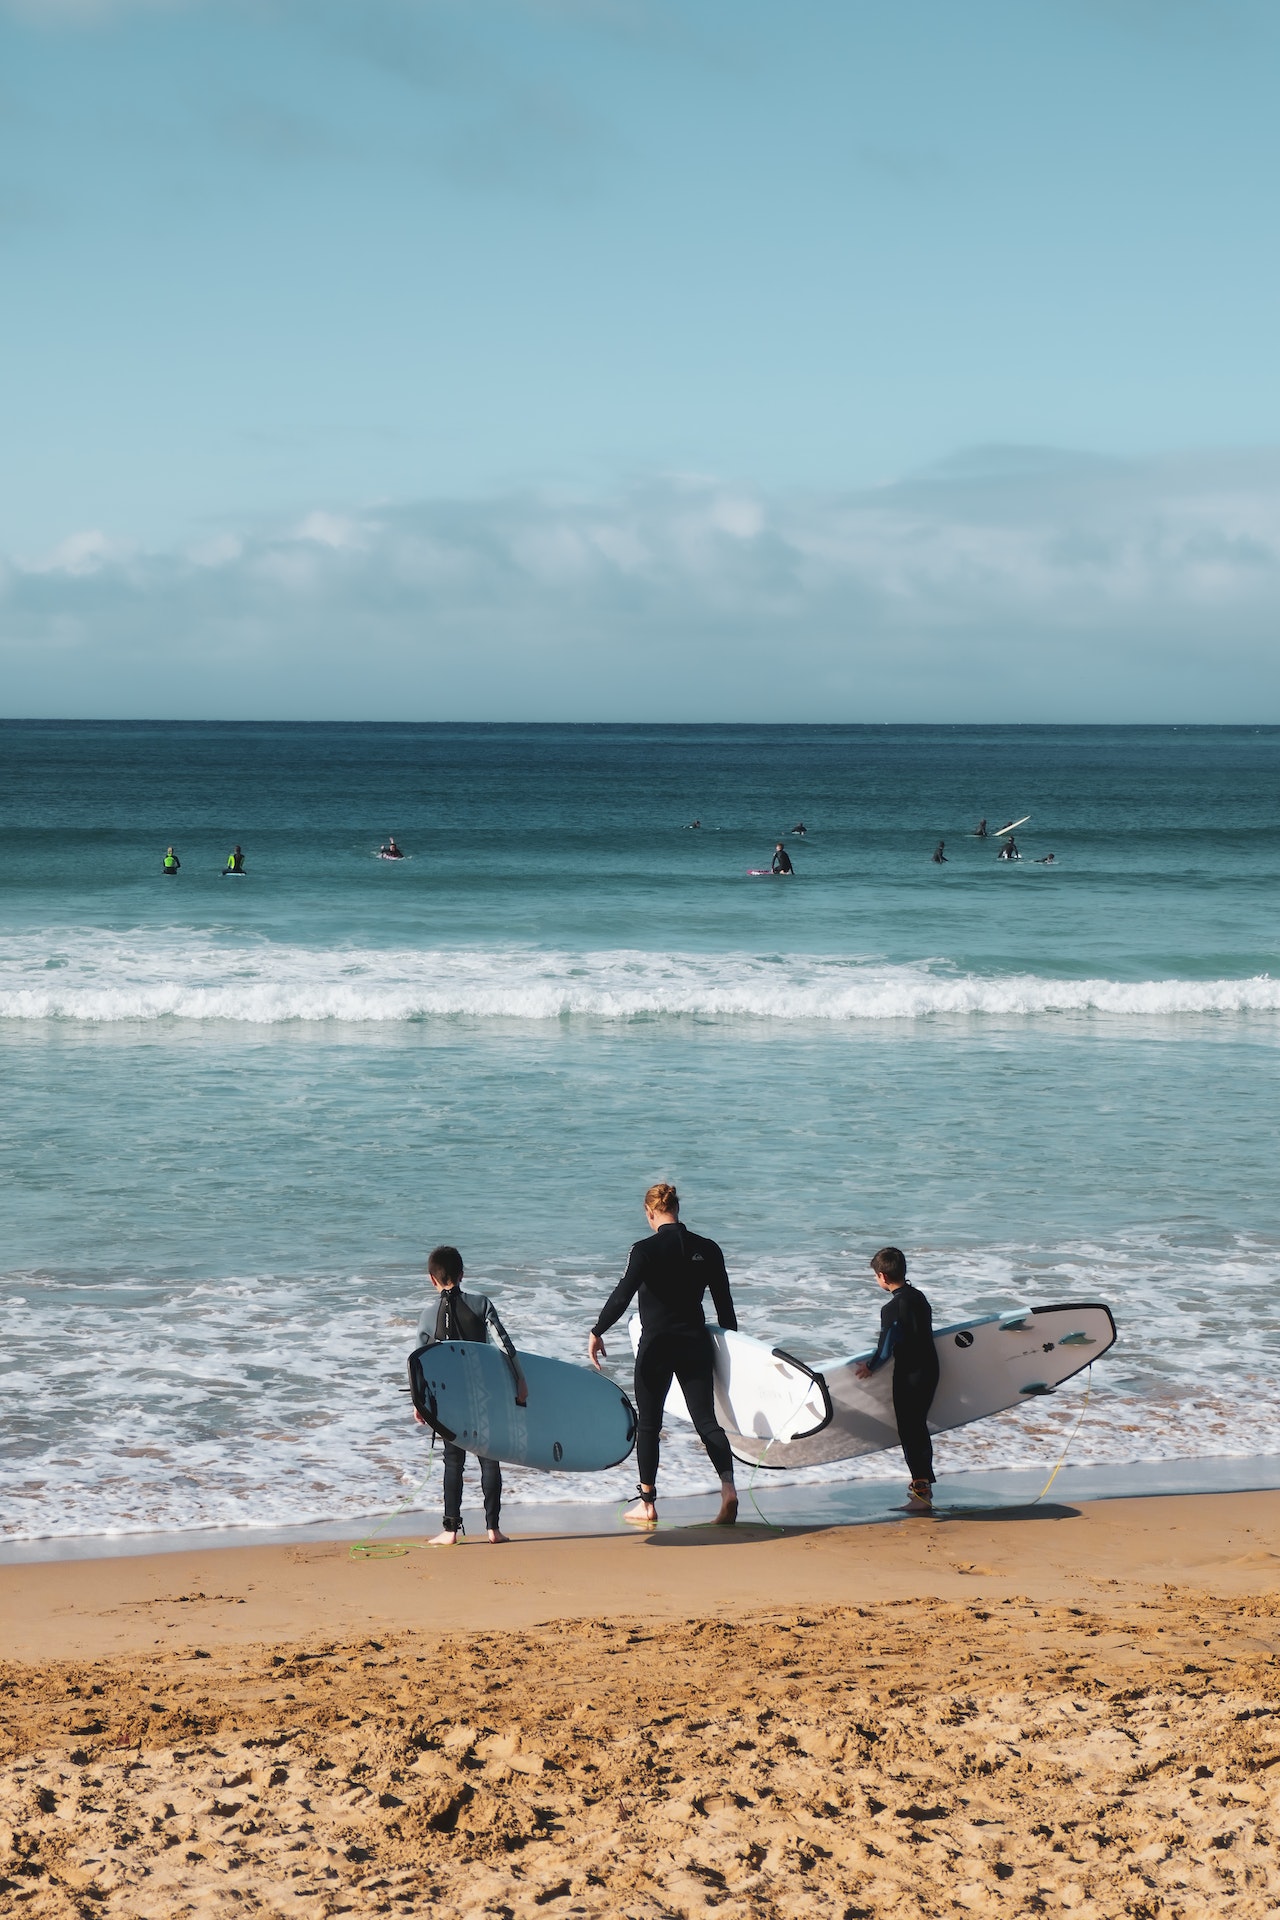 Surfing And Beach Life In Australia - Embracing The Coastal Lifestyle